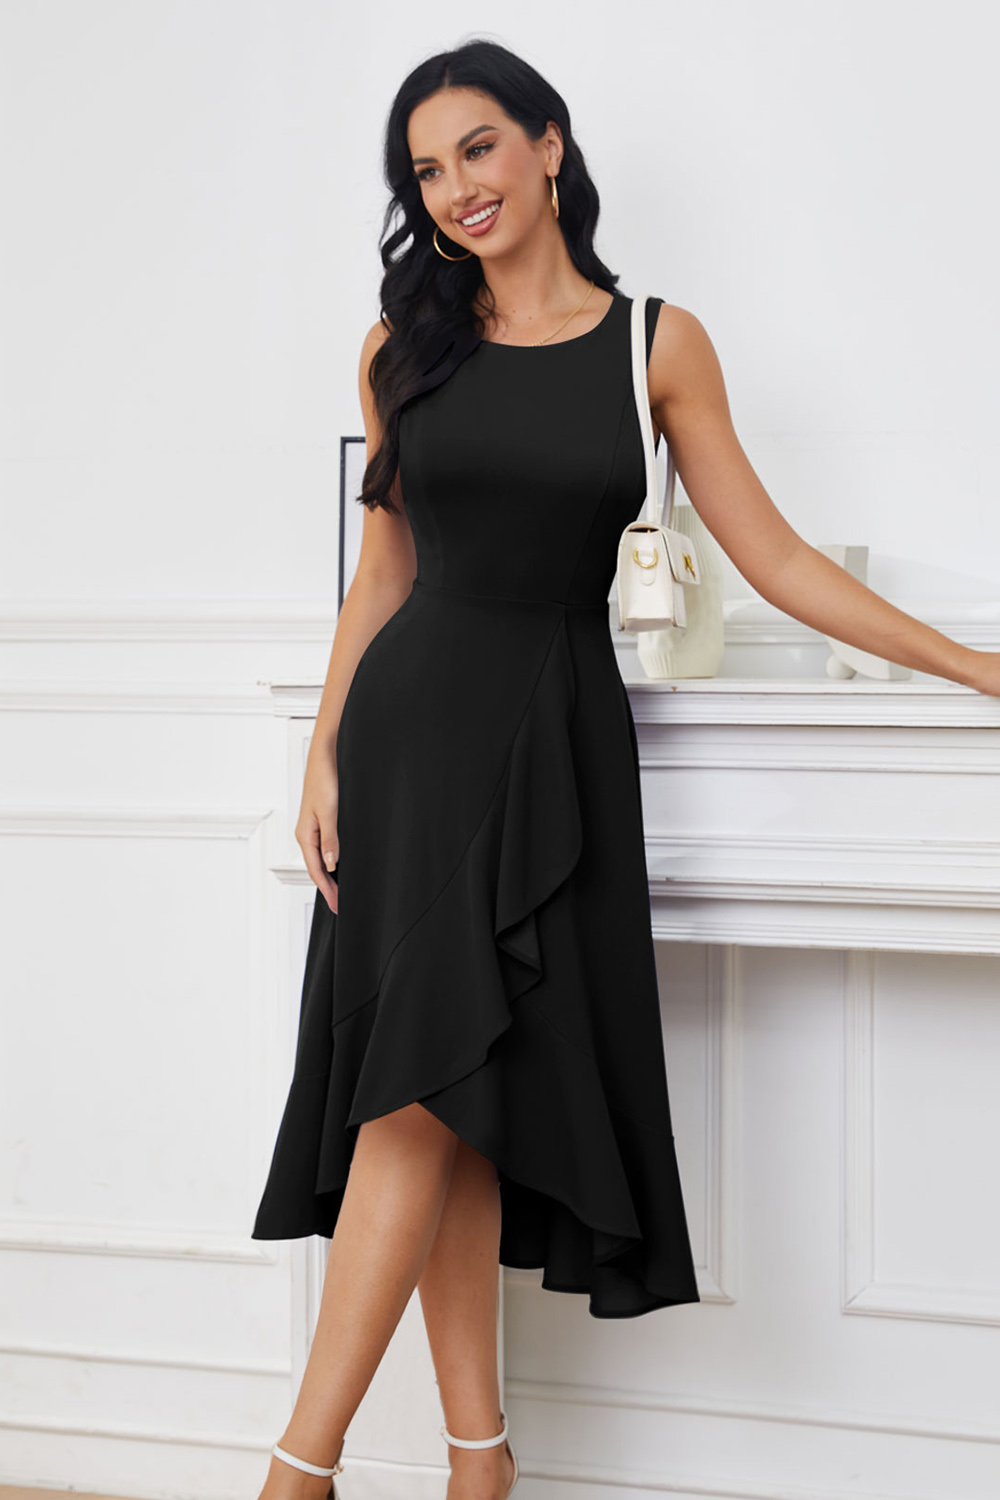 Black Cocktail Party Dress Formal Church Dress for Wedding Guest Fit Flare Modest Prom Midi Evening Dress